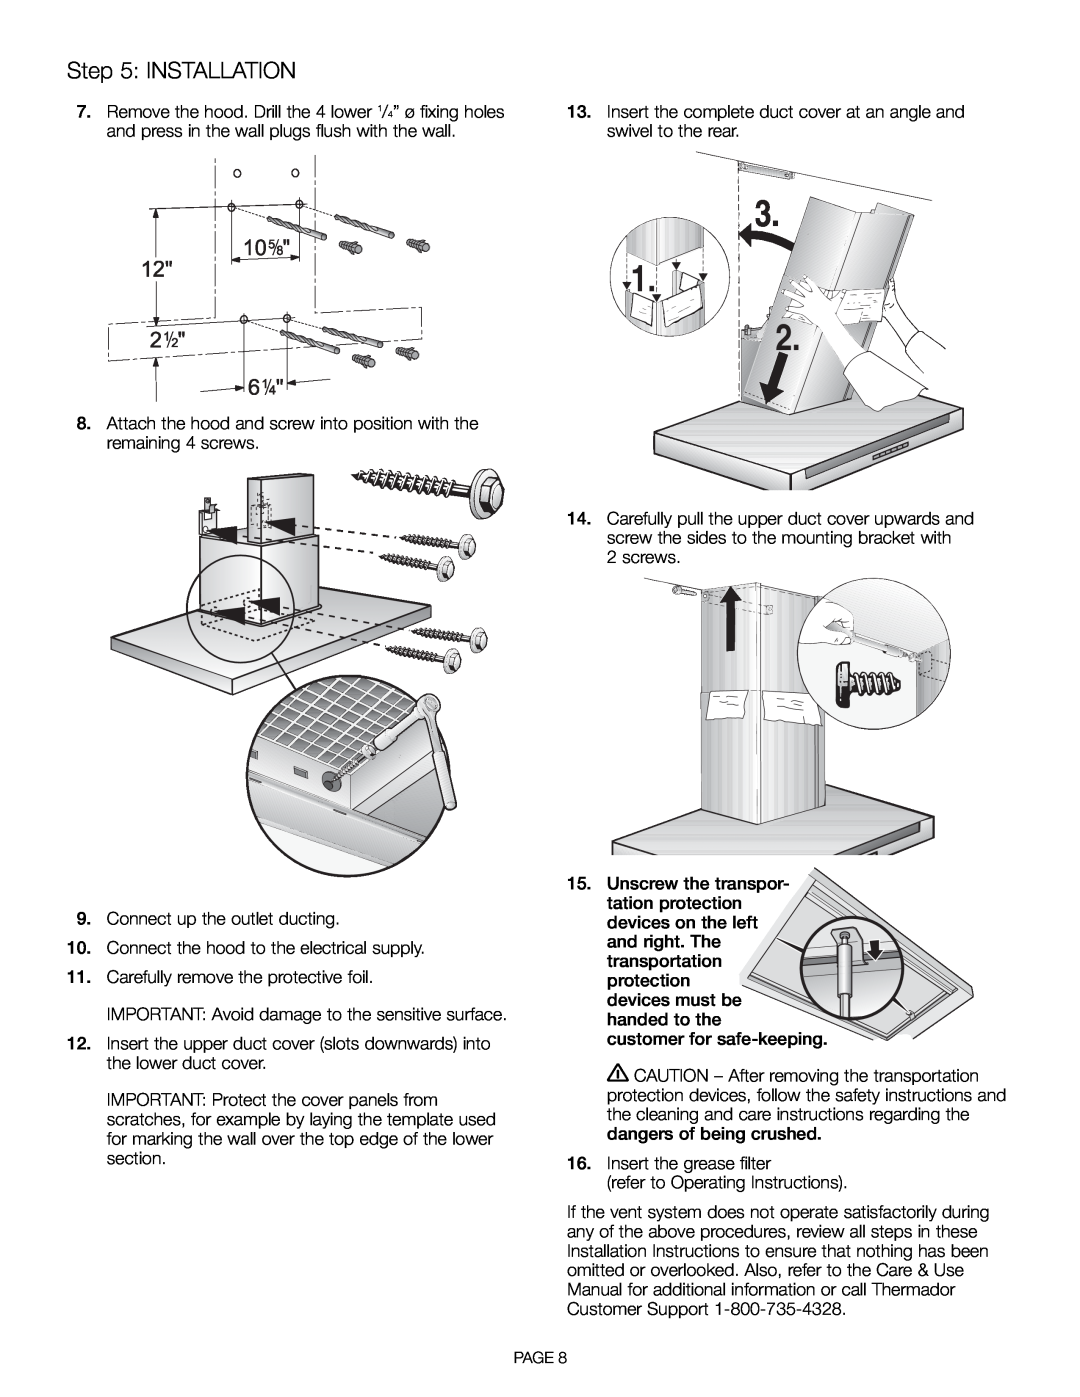 Thermador HDDW36FS installation manual Installation, Insert the complete duct cover at an angle and swivel to the rear 